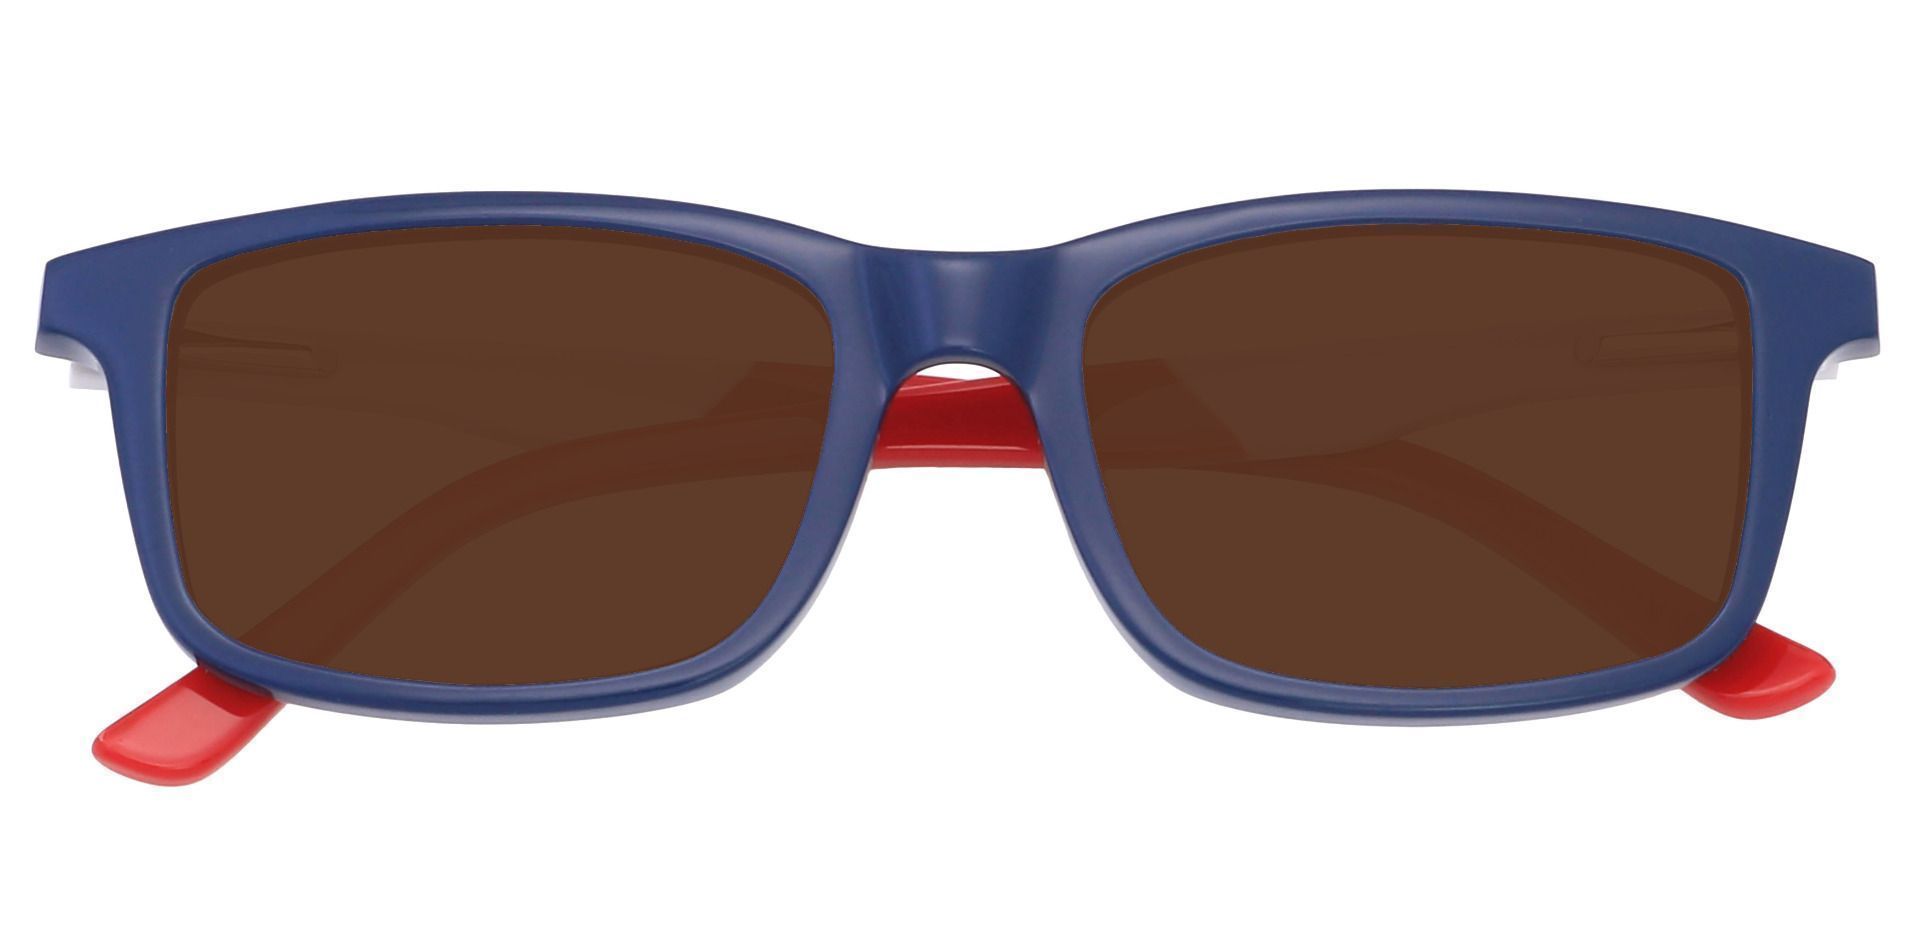 Hub Rectangle Non-Rx Sunglasses - Blue Frame With Brown Lenses